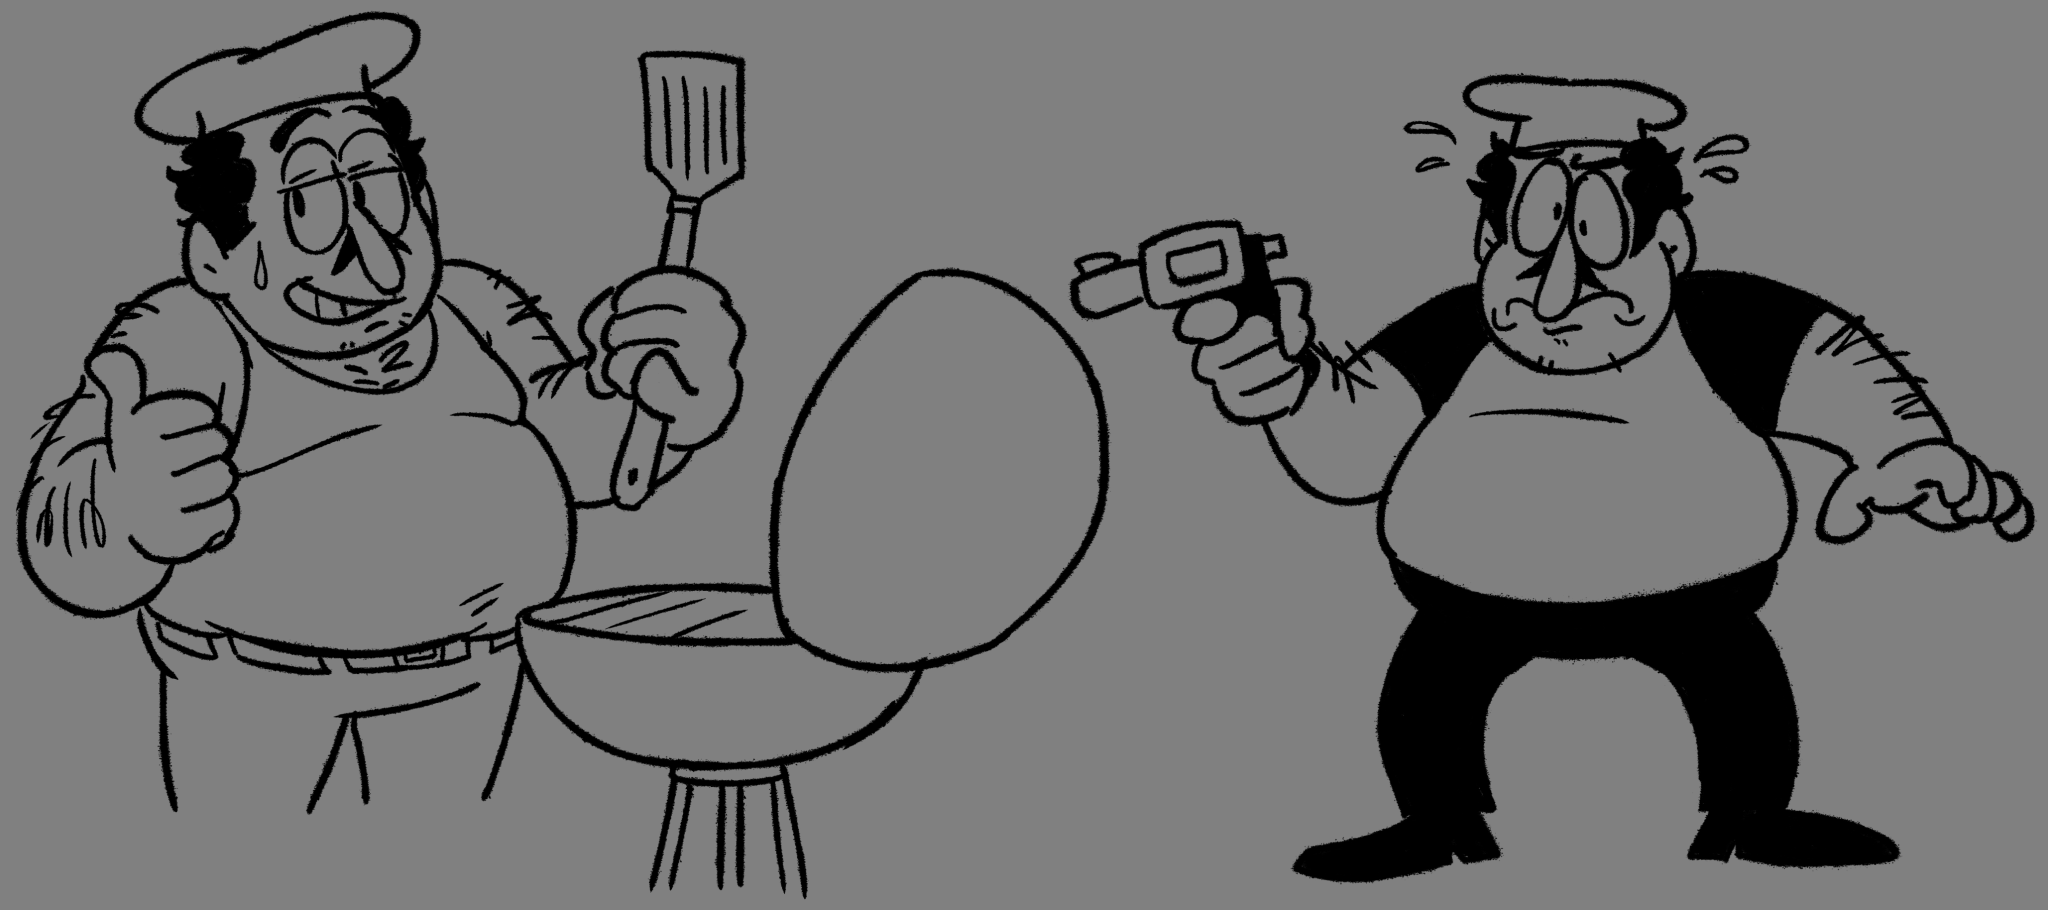 Peppino holding a gun and also Peppino at a grill